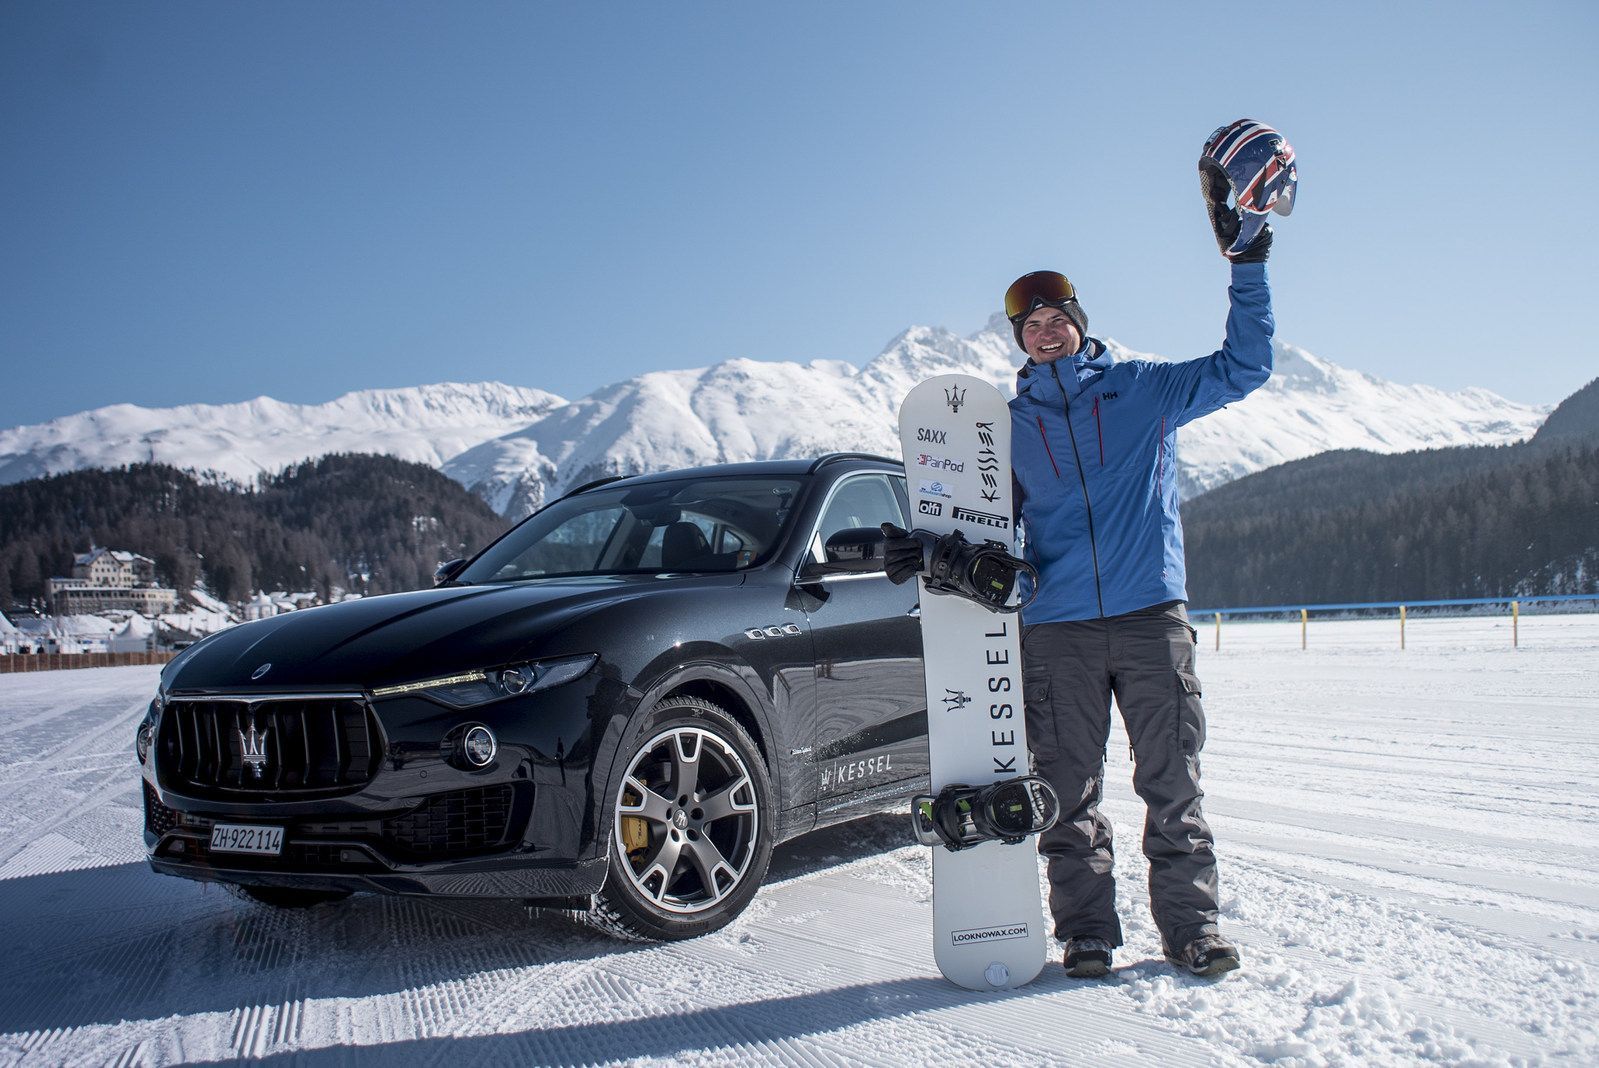  Fastest speed for a snowboard towed by a vehicle: world record set by Jamie Barrow (VIDEO)    